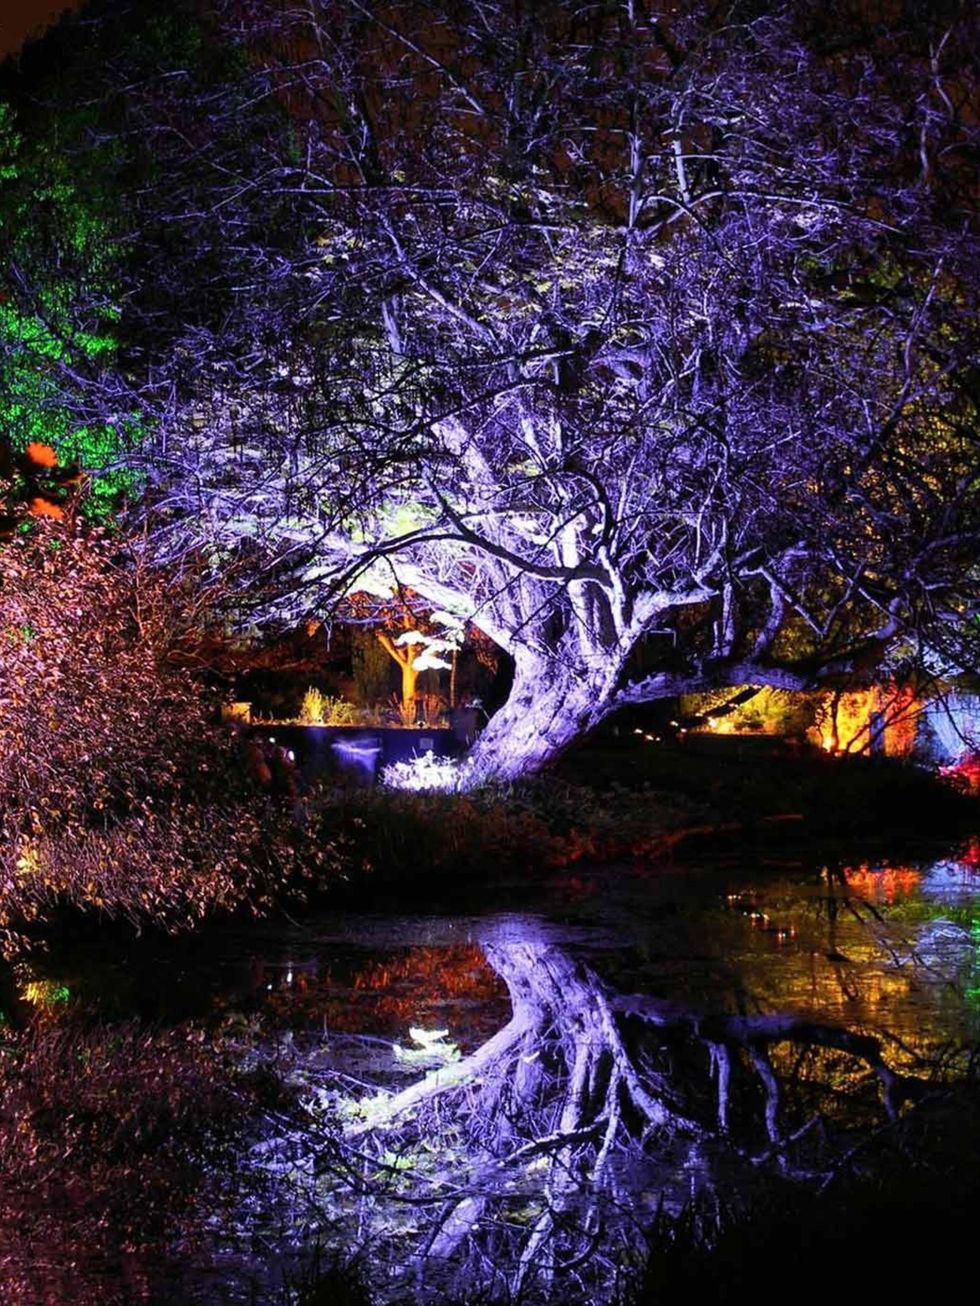 &lt;p&gt;&lt;strong&gt;Visit now&lt;/strong&gt;&lt;/p&gt;&lt;p&gt;However old you are the idea of exploring an enchanted woodland has its appeals. Each weekend between 5 and 9pm until 8th December the gardens of Syon House, Brentford will be transformed i